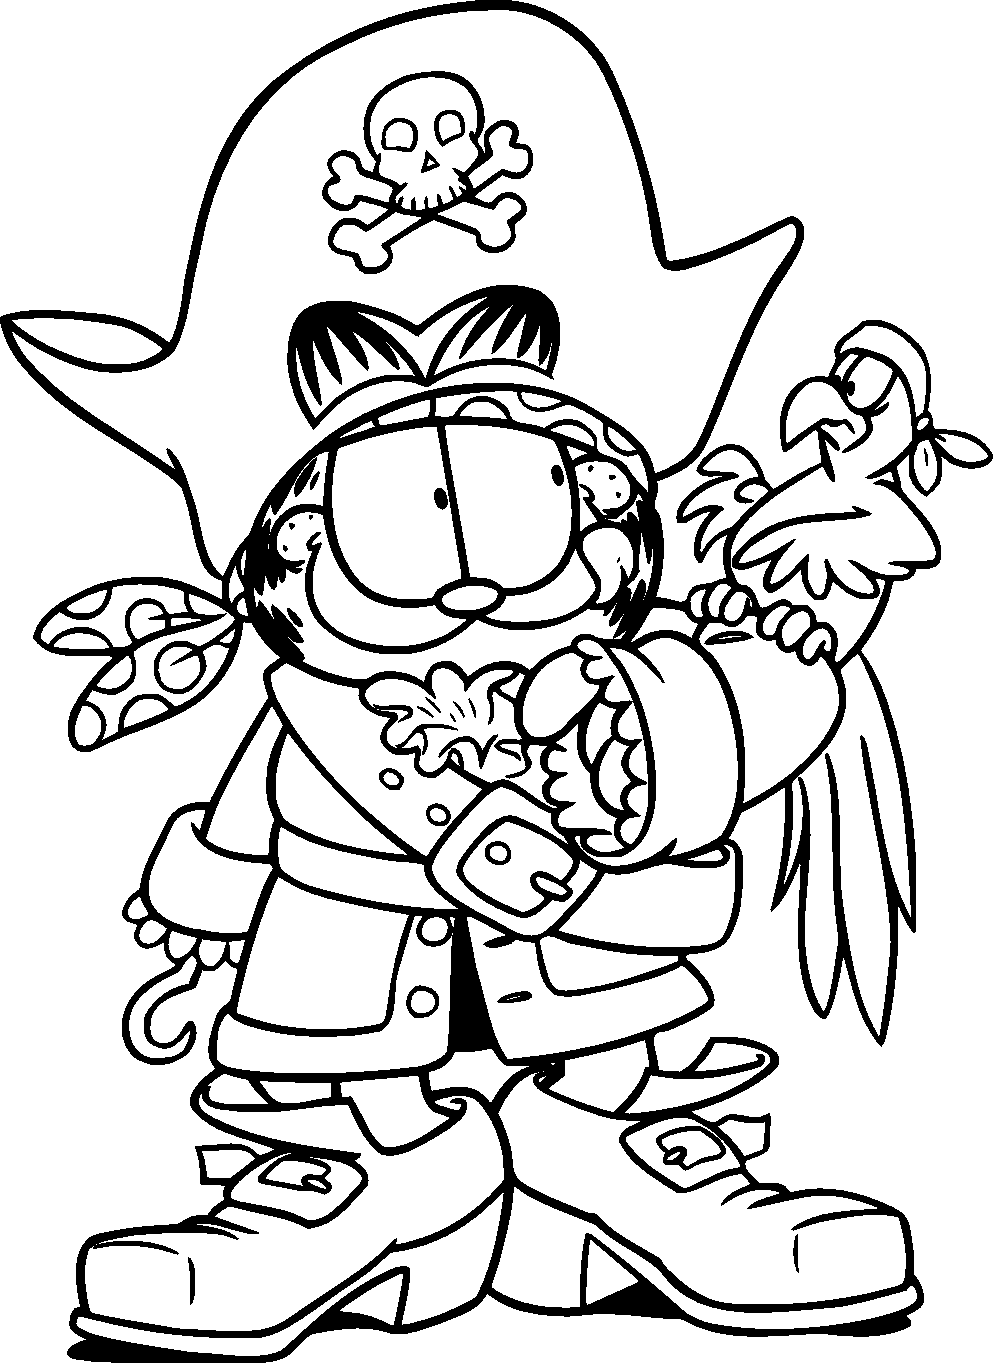 garfield christmas coloring pages Garfield christmas coloring pages at getdrawings